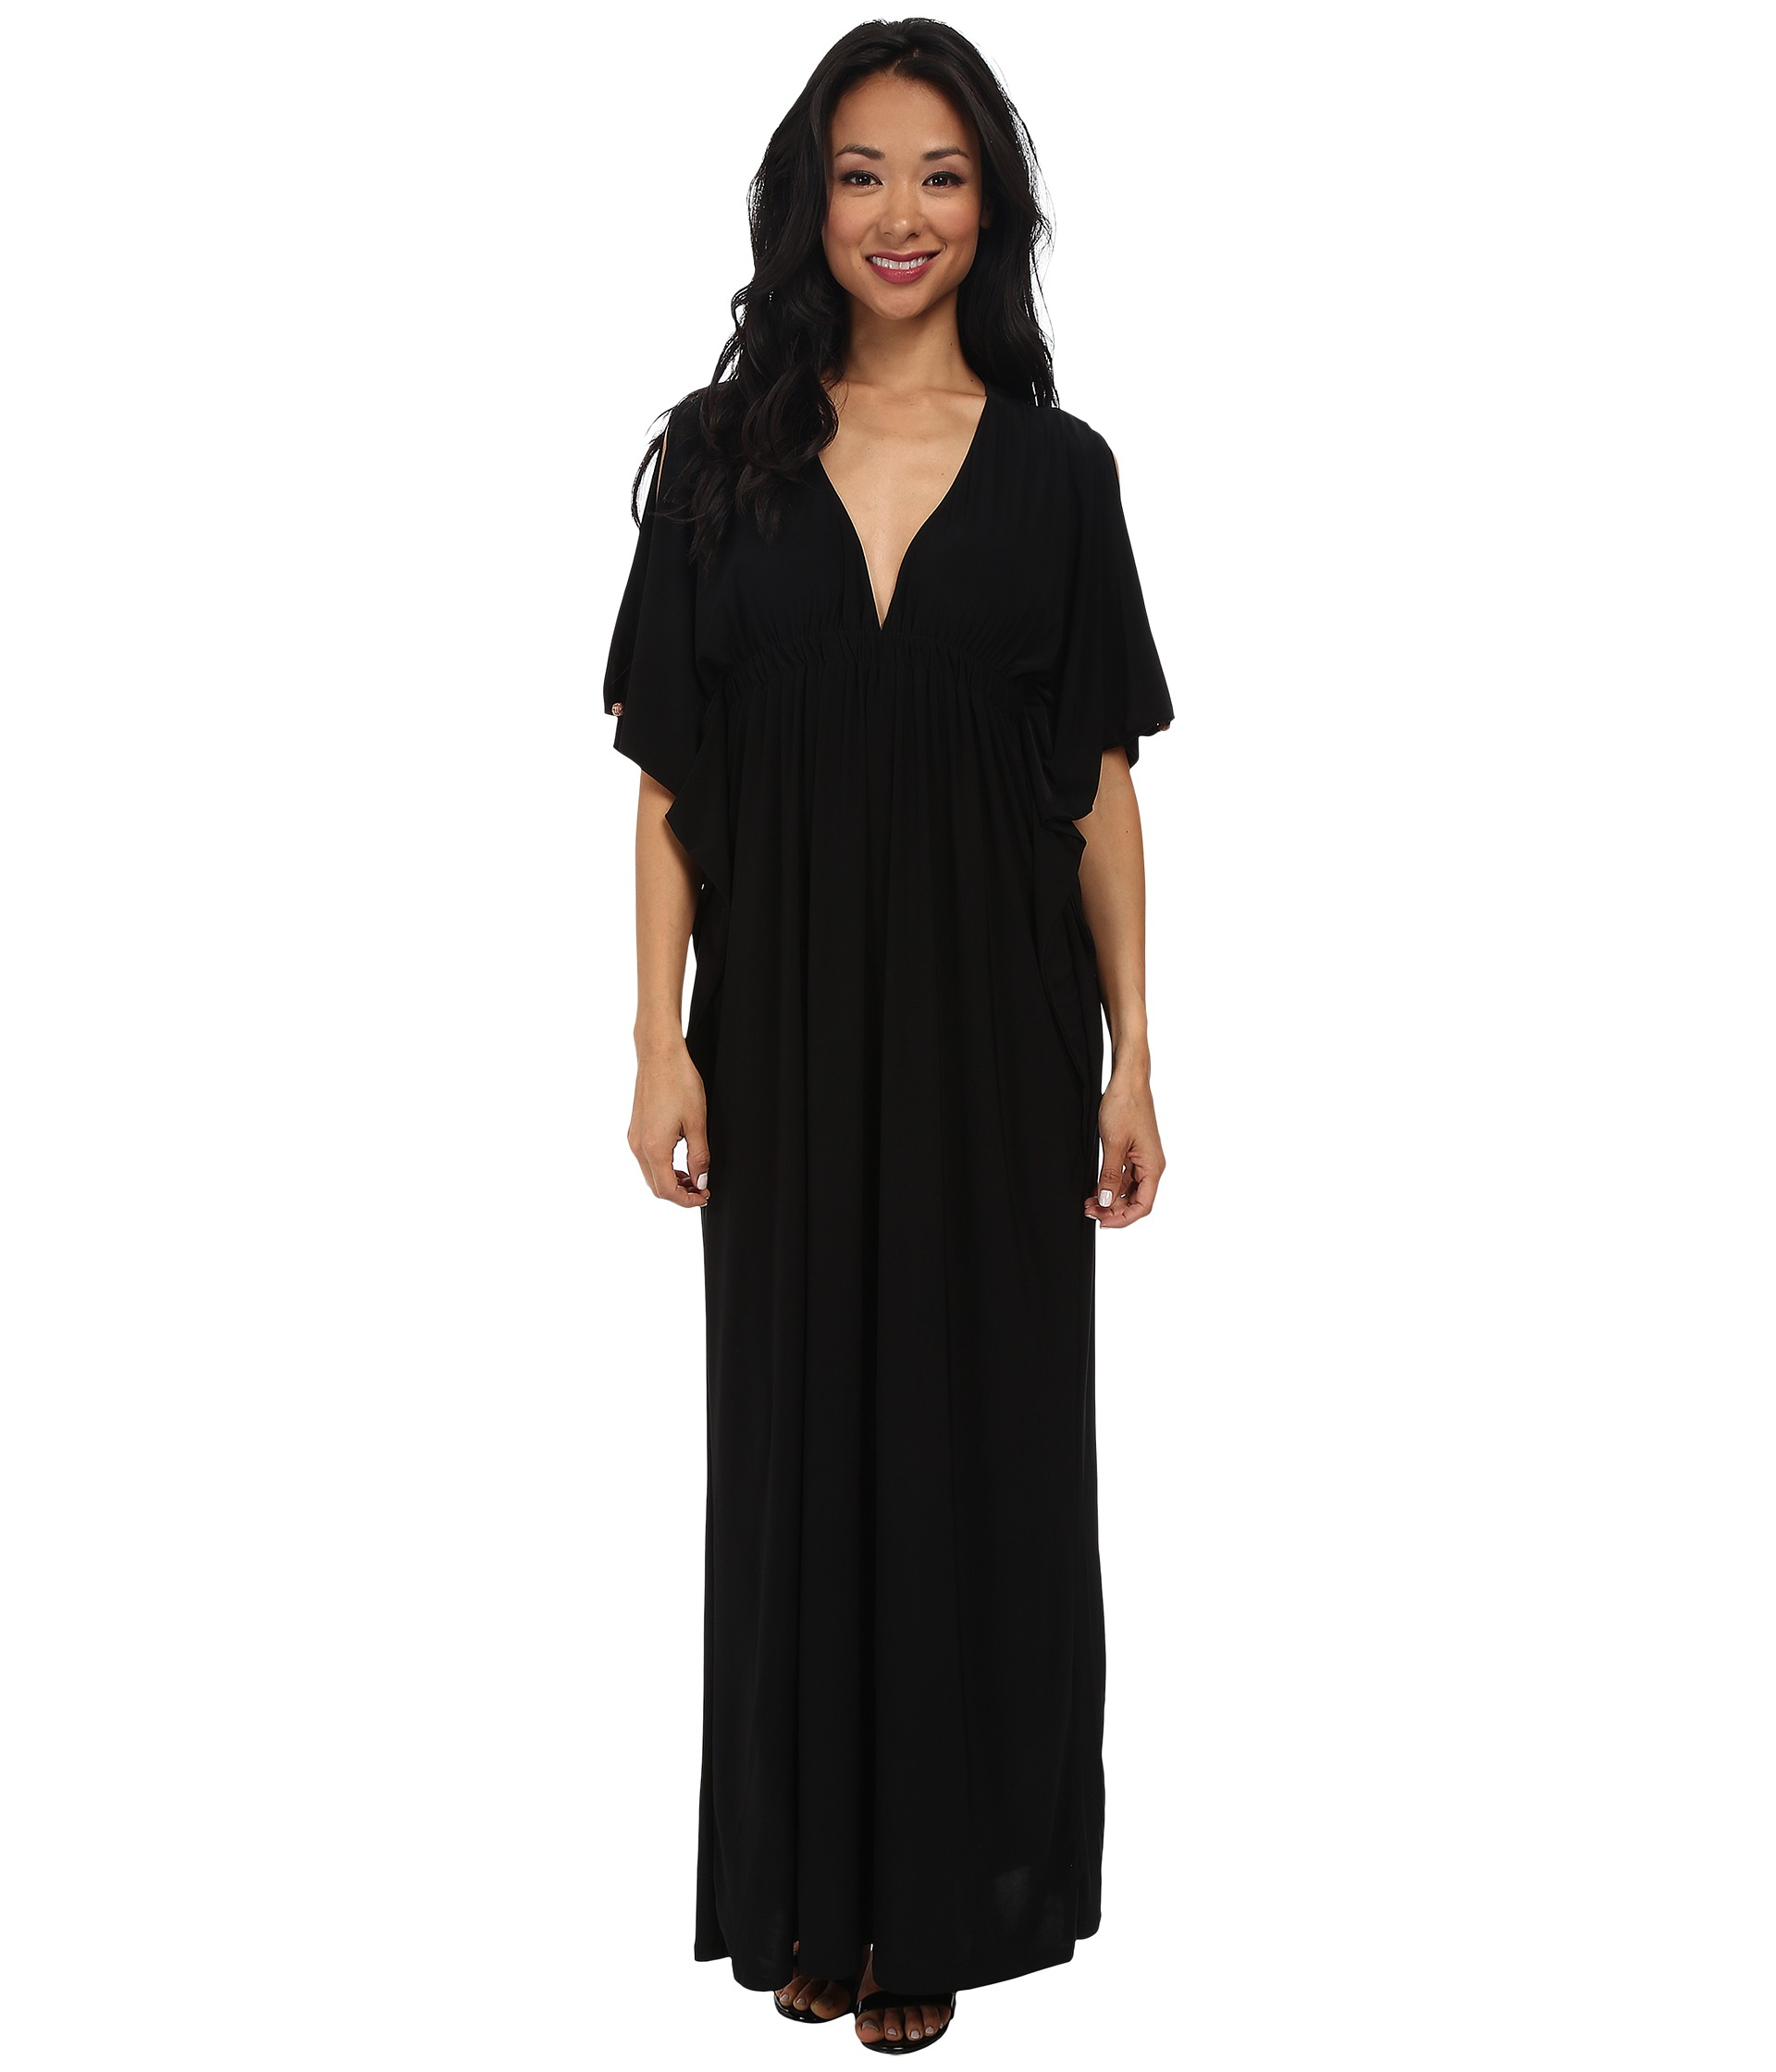 T-bags Open Sleeves Bat Wing Maxi Dress With Cutout Back in Black | Lyst